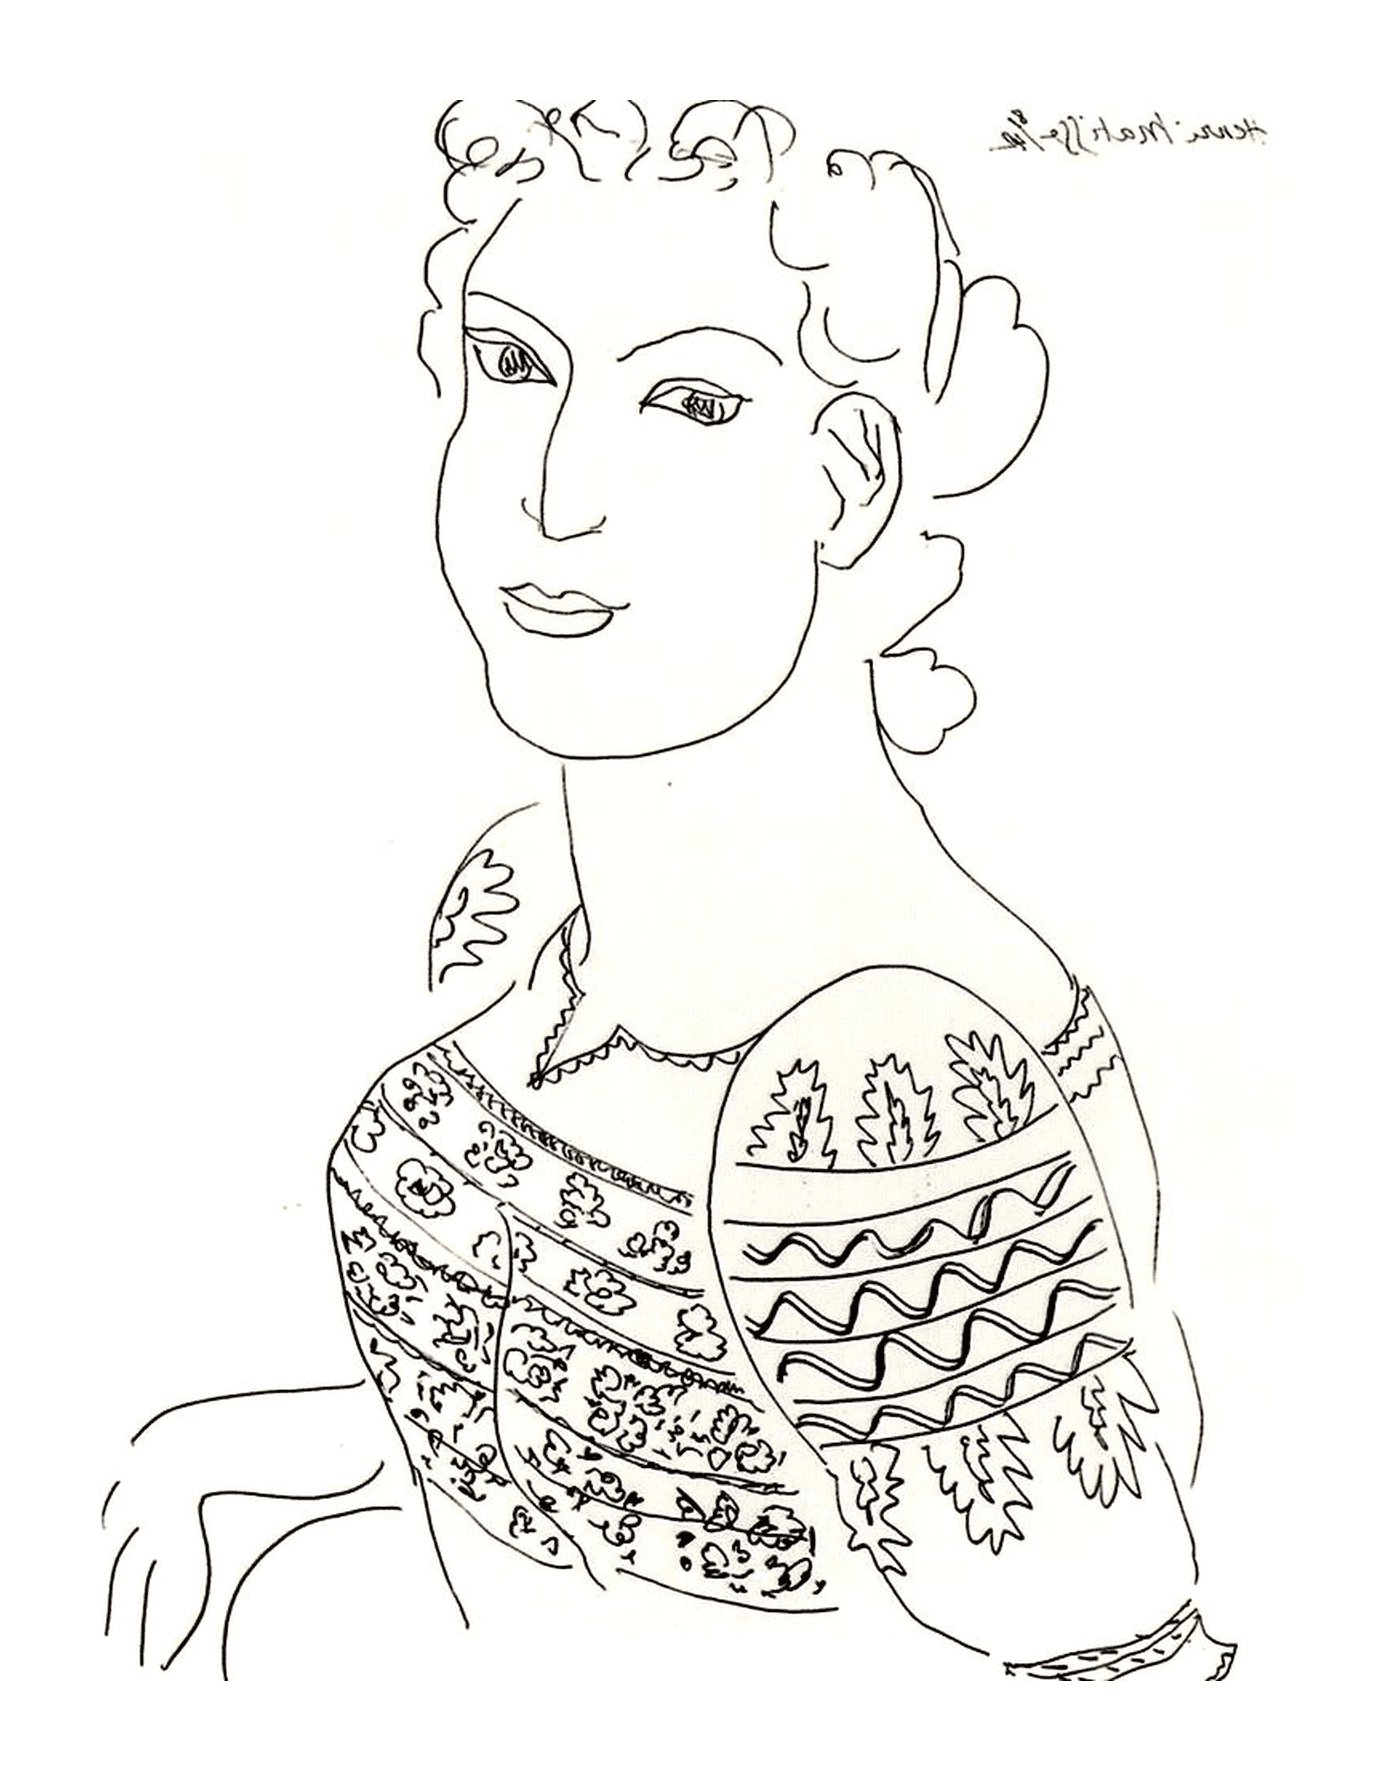  a woman wearing a sweater on a Romanian blouse difficult to identify, probably a Matisse work 